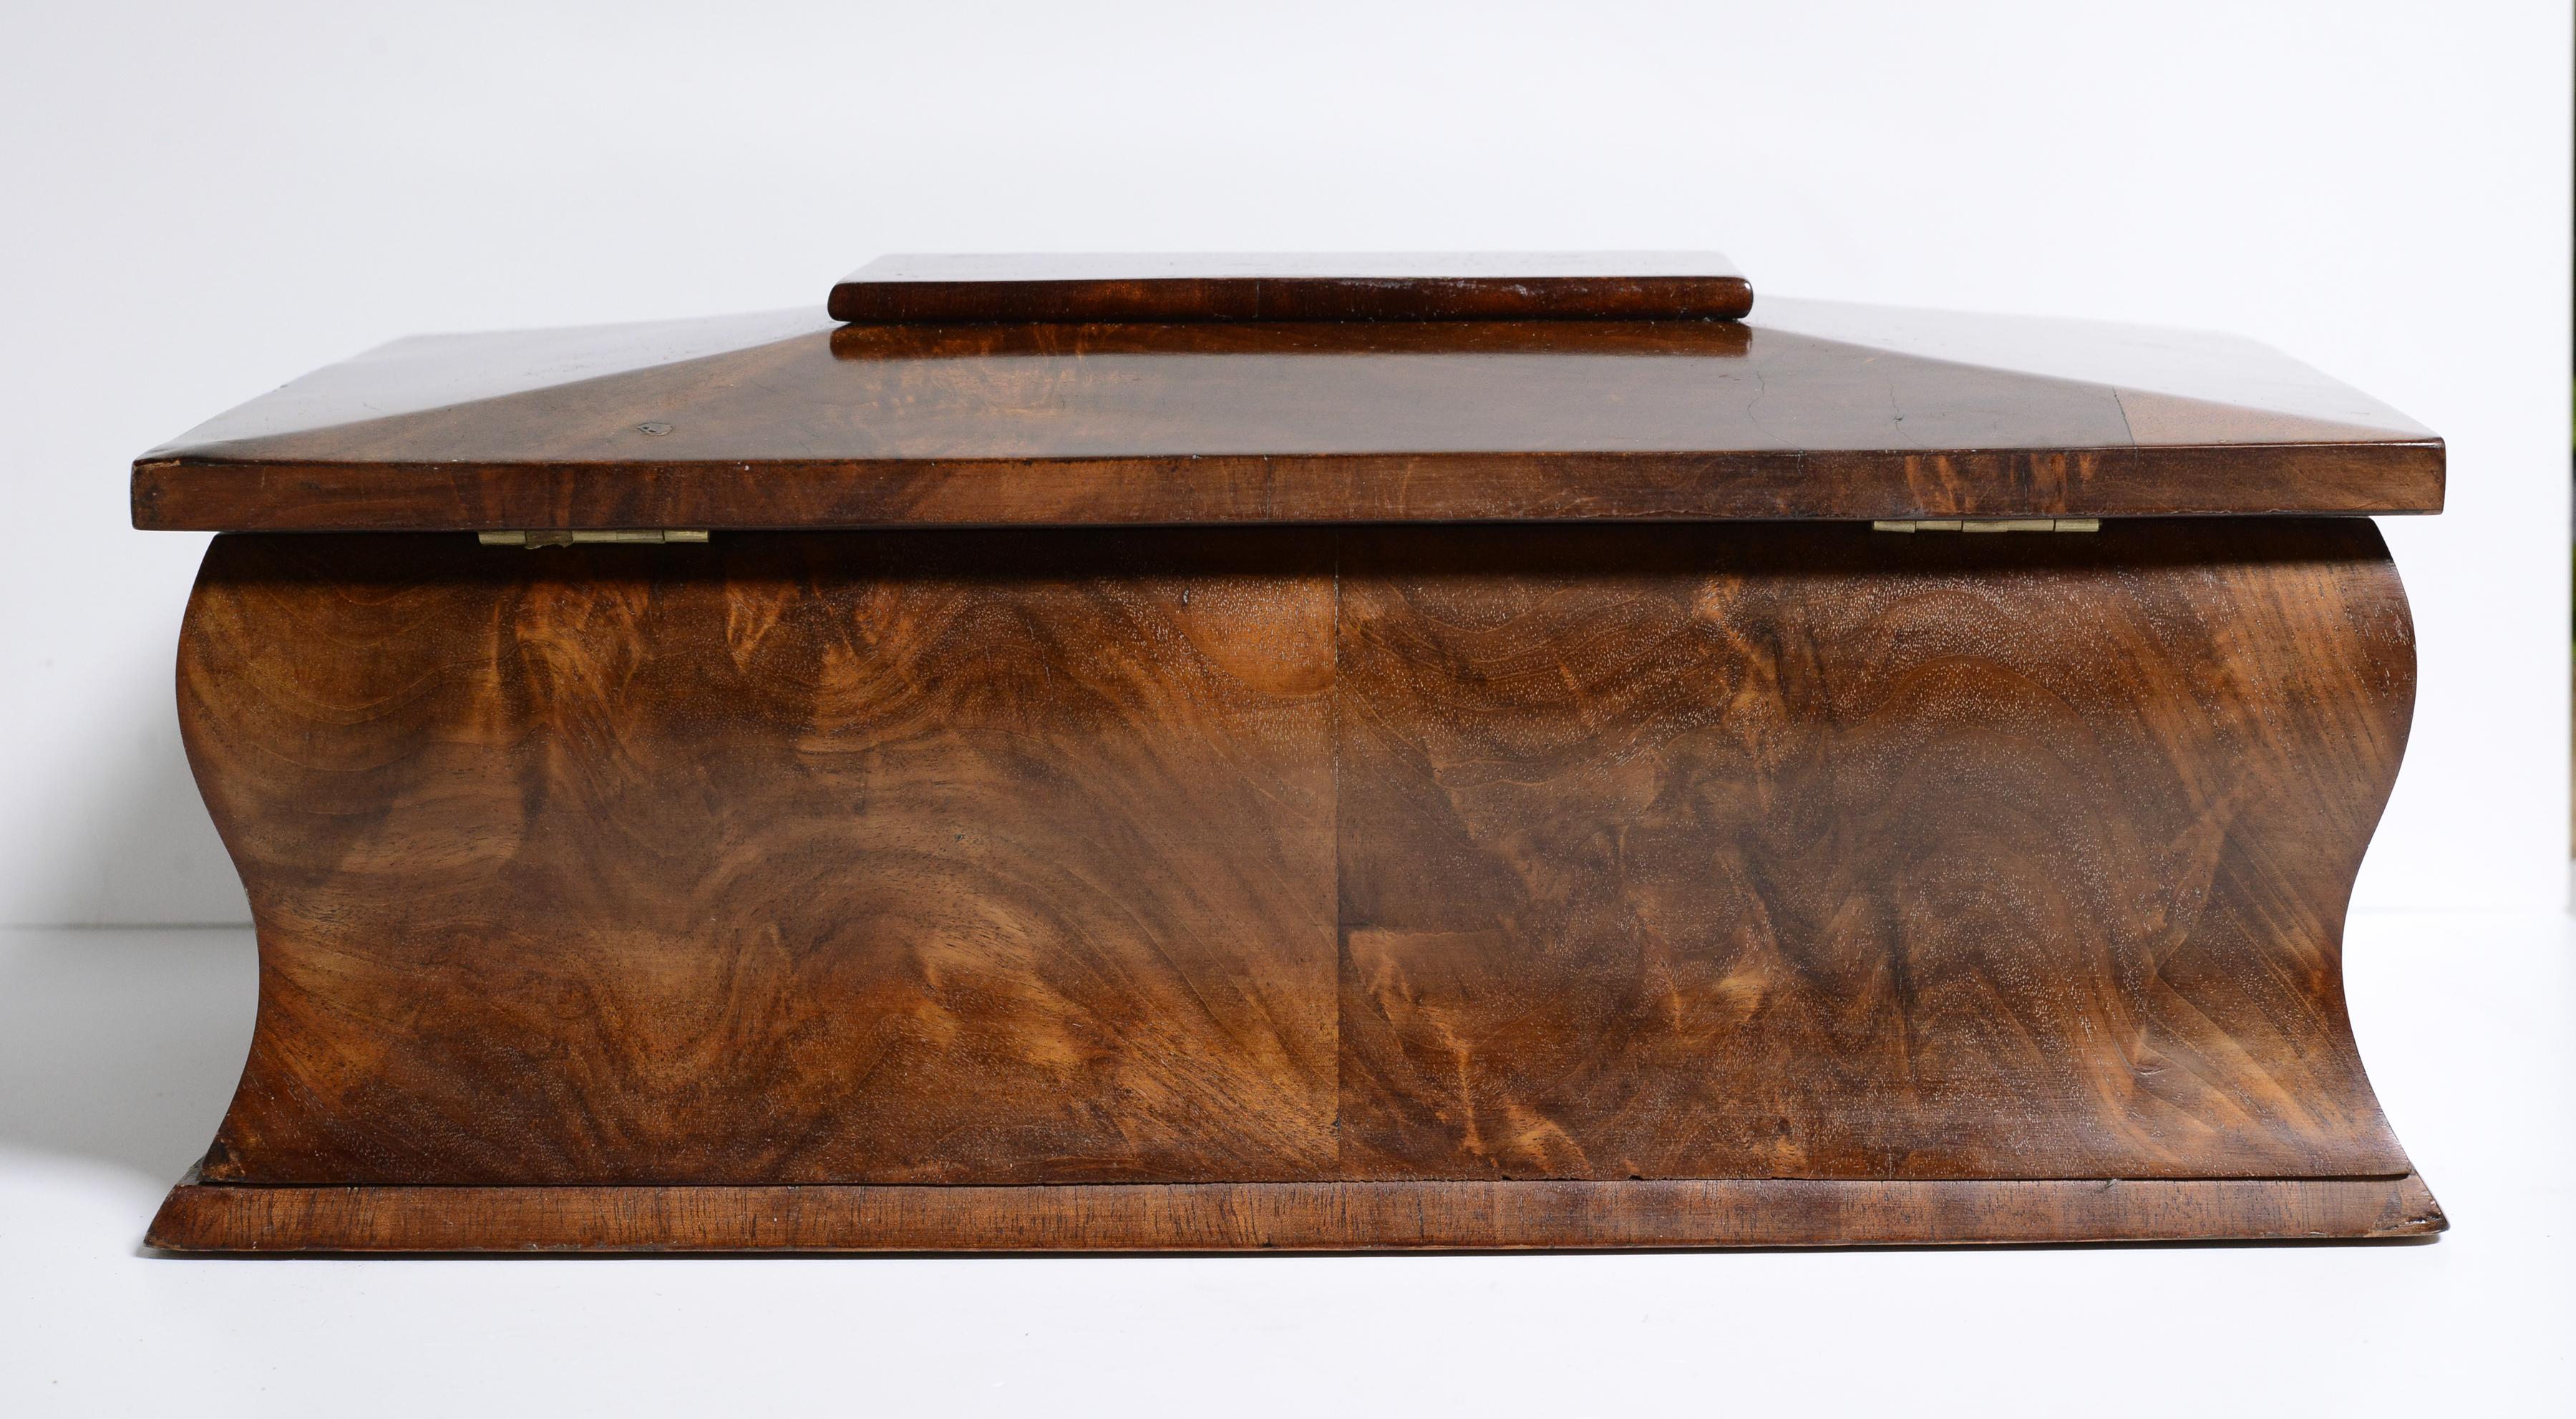 Wooden Casket Box with Mirror mid 19th century Flame Mahogany Biedermeier For Sale 2